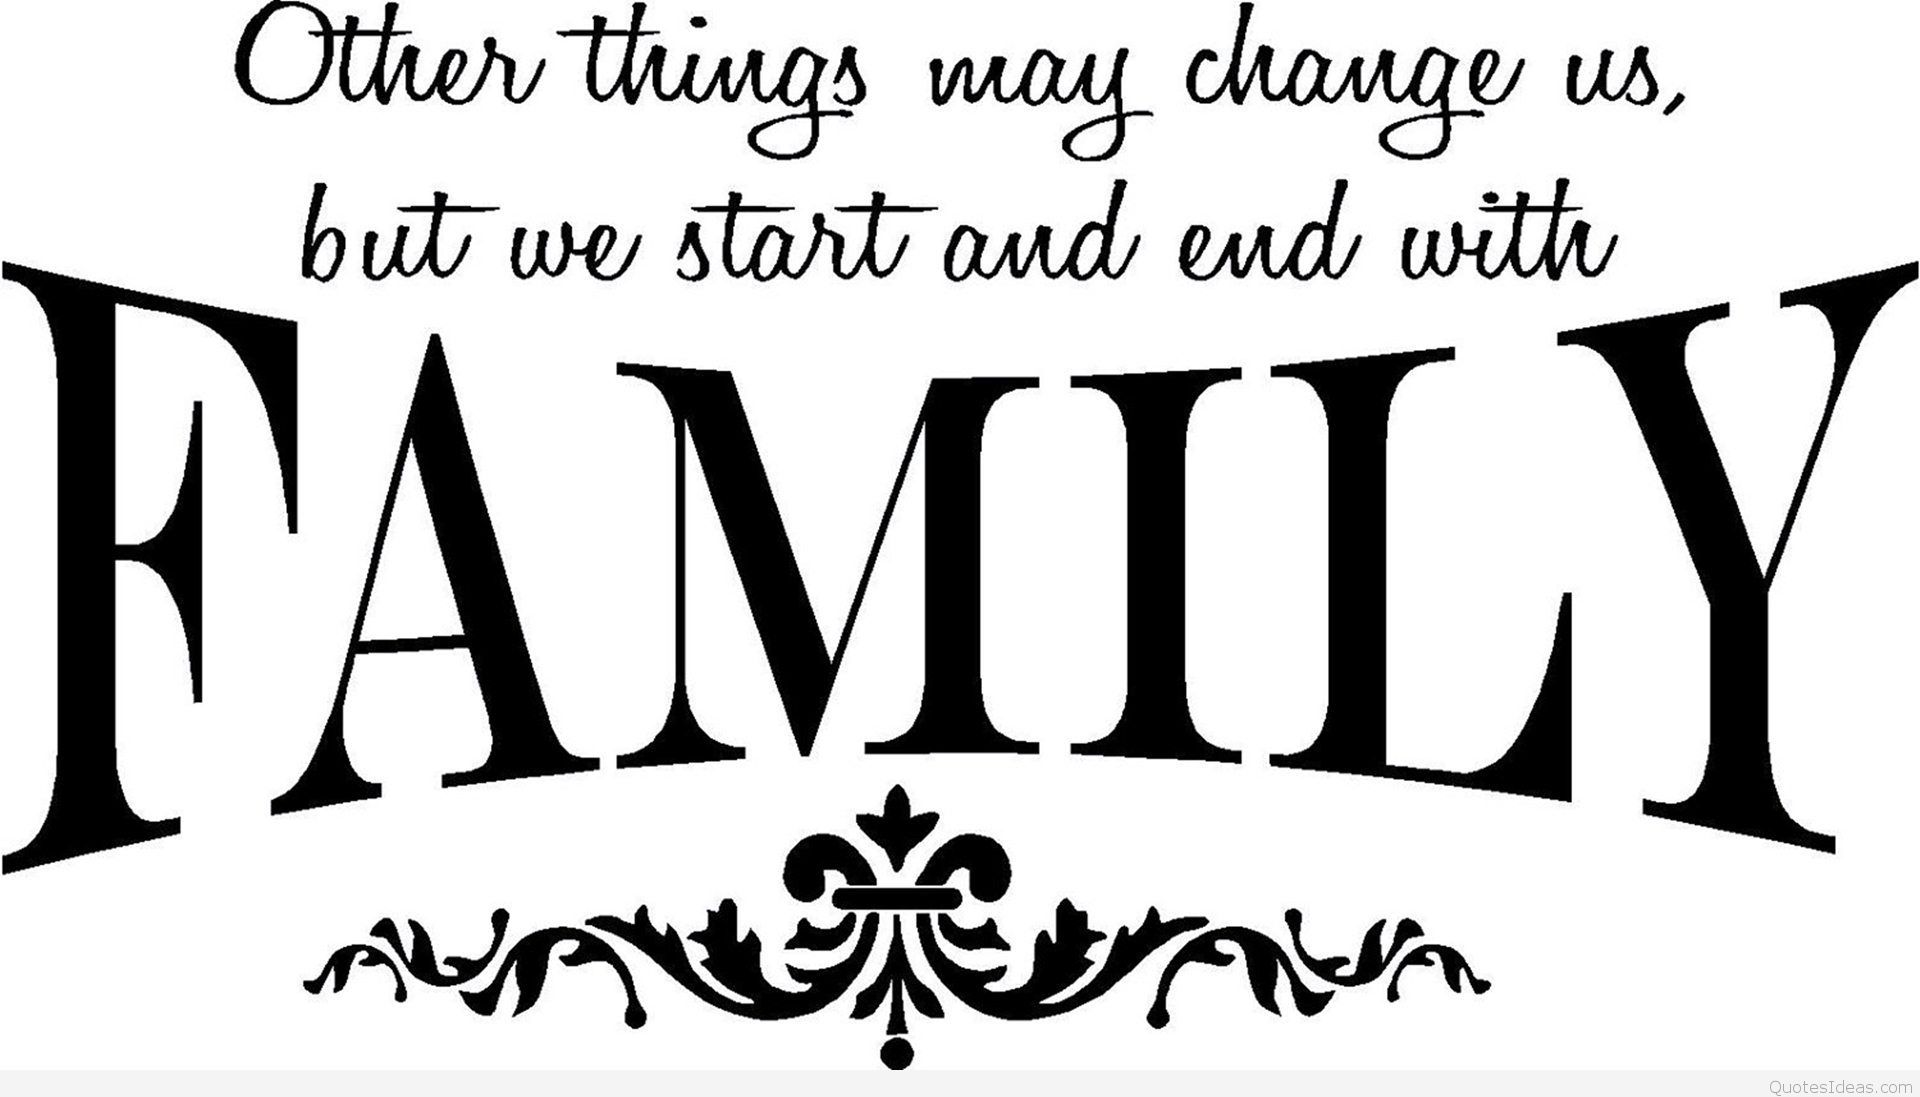 Cute cover family quote 2015 inspiring